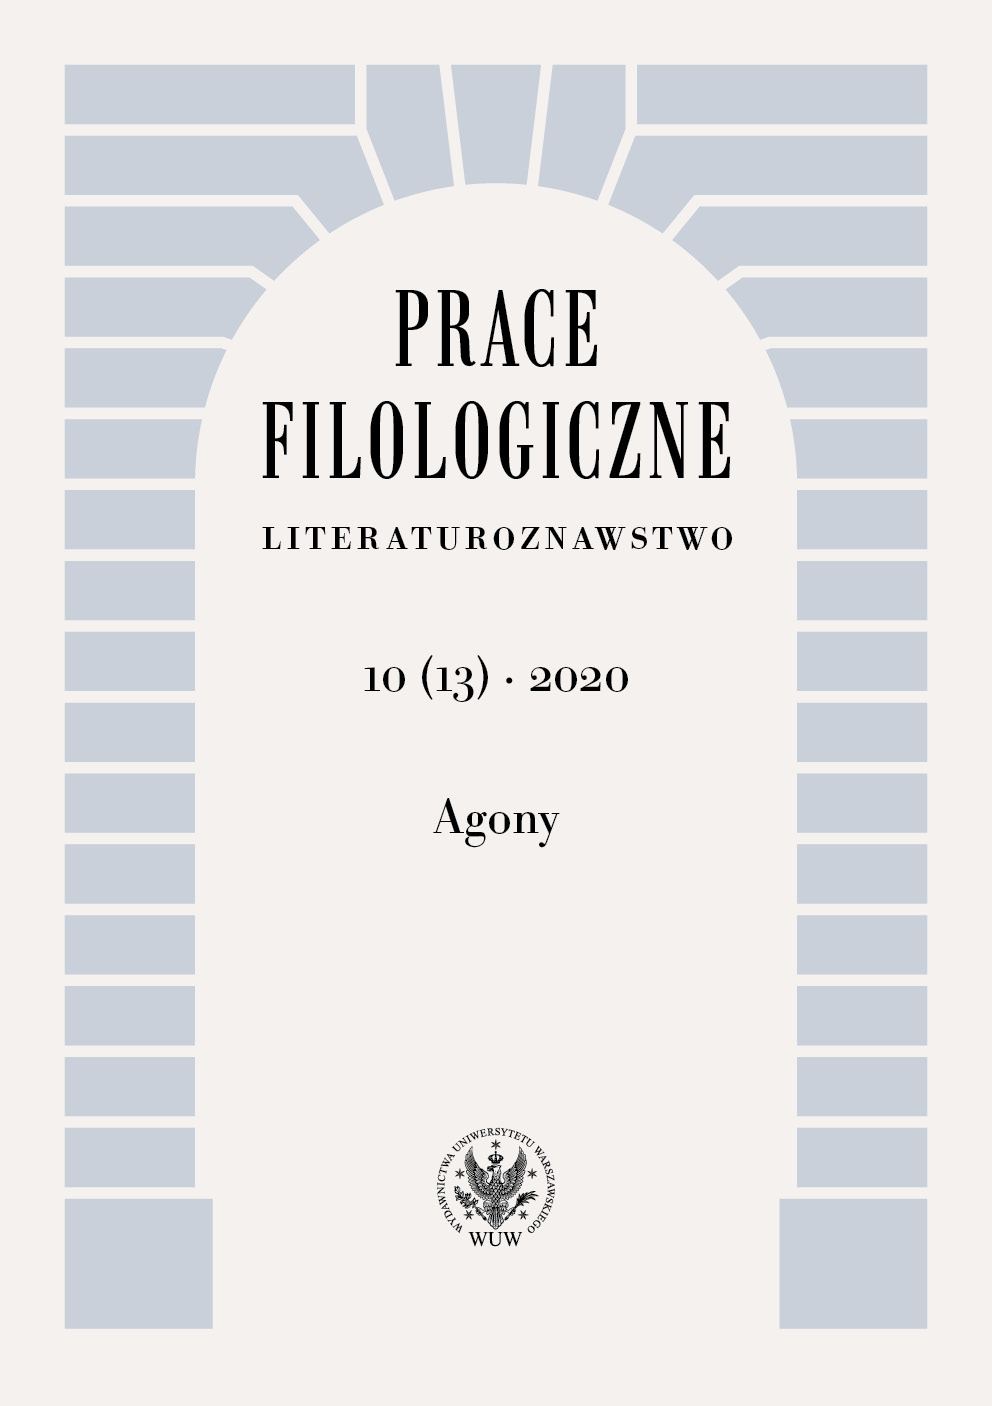 Philological Studies. Literary Research